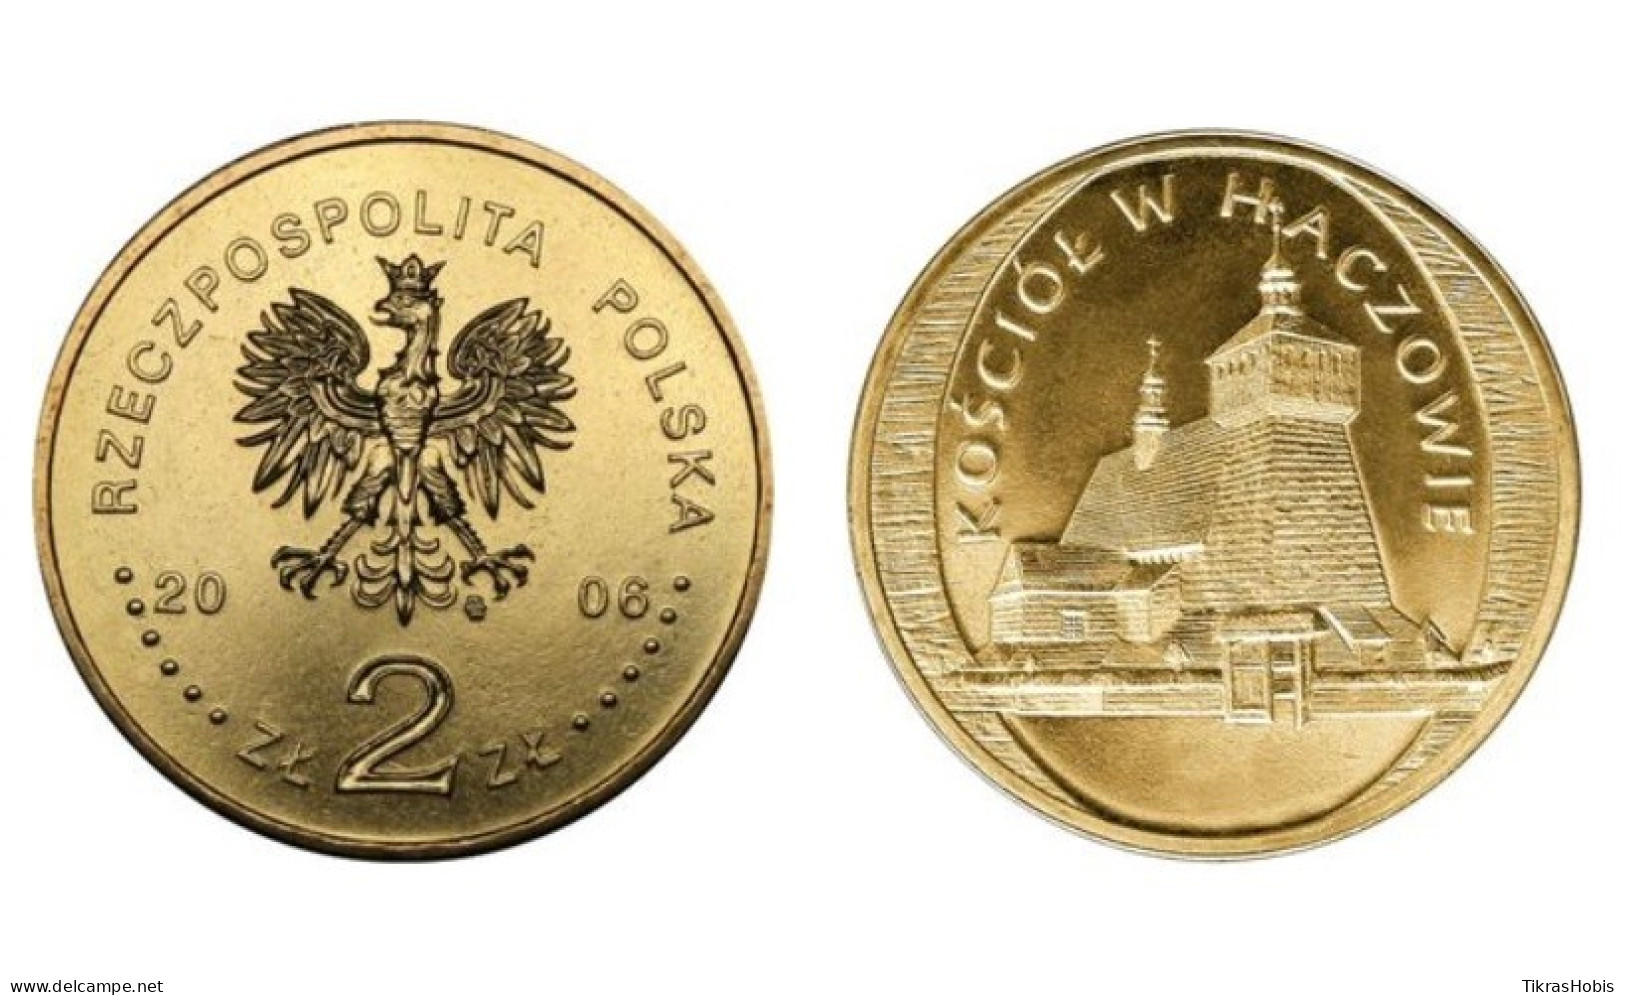 Poland 2 Zlotys, 2006 Church In Haczove Y547 - Pologne